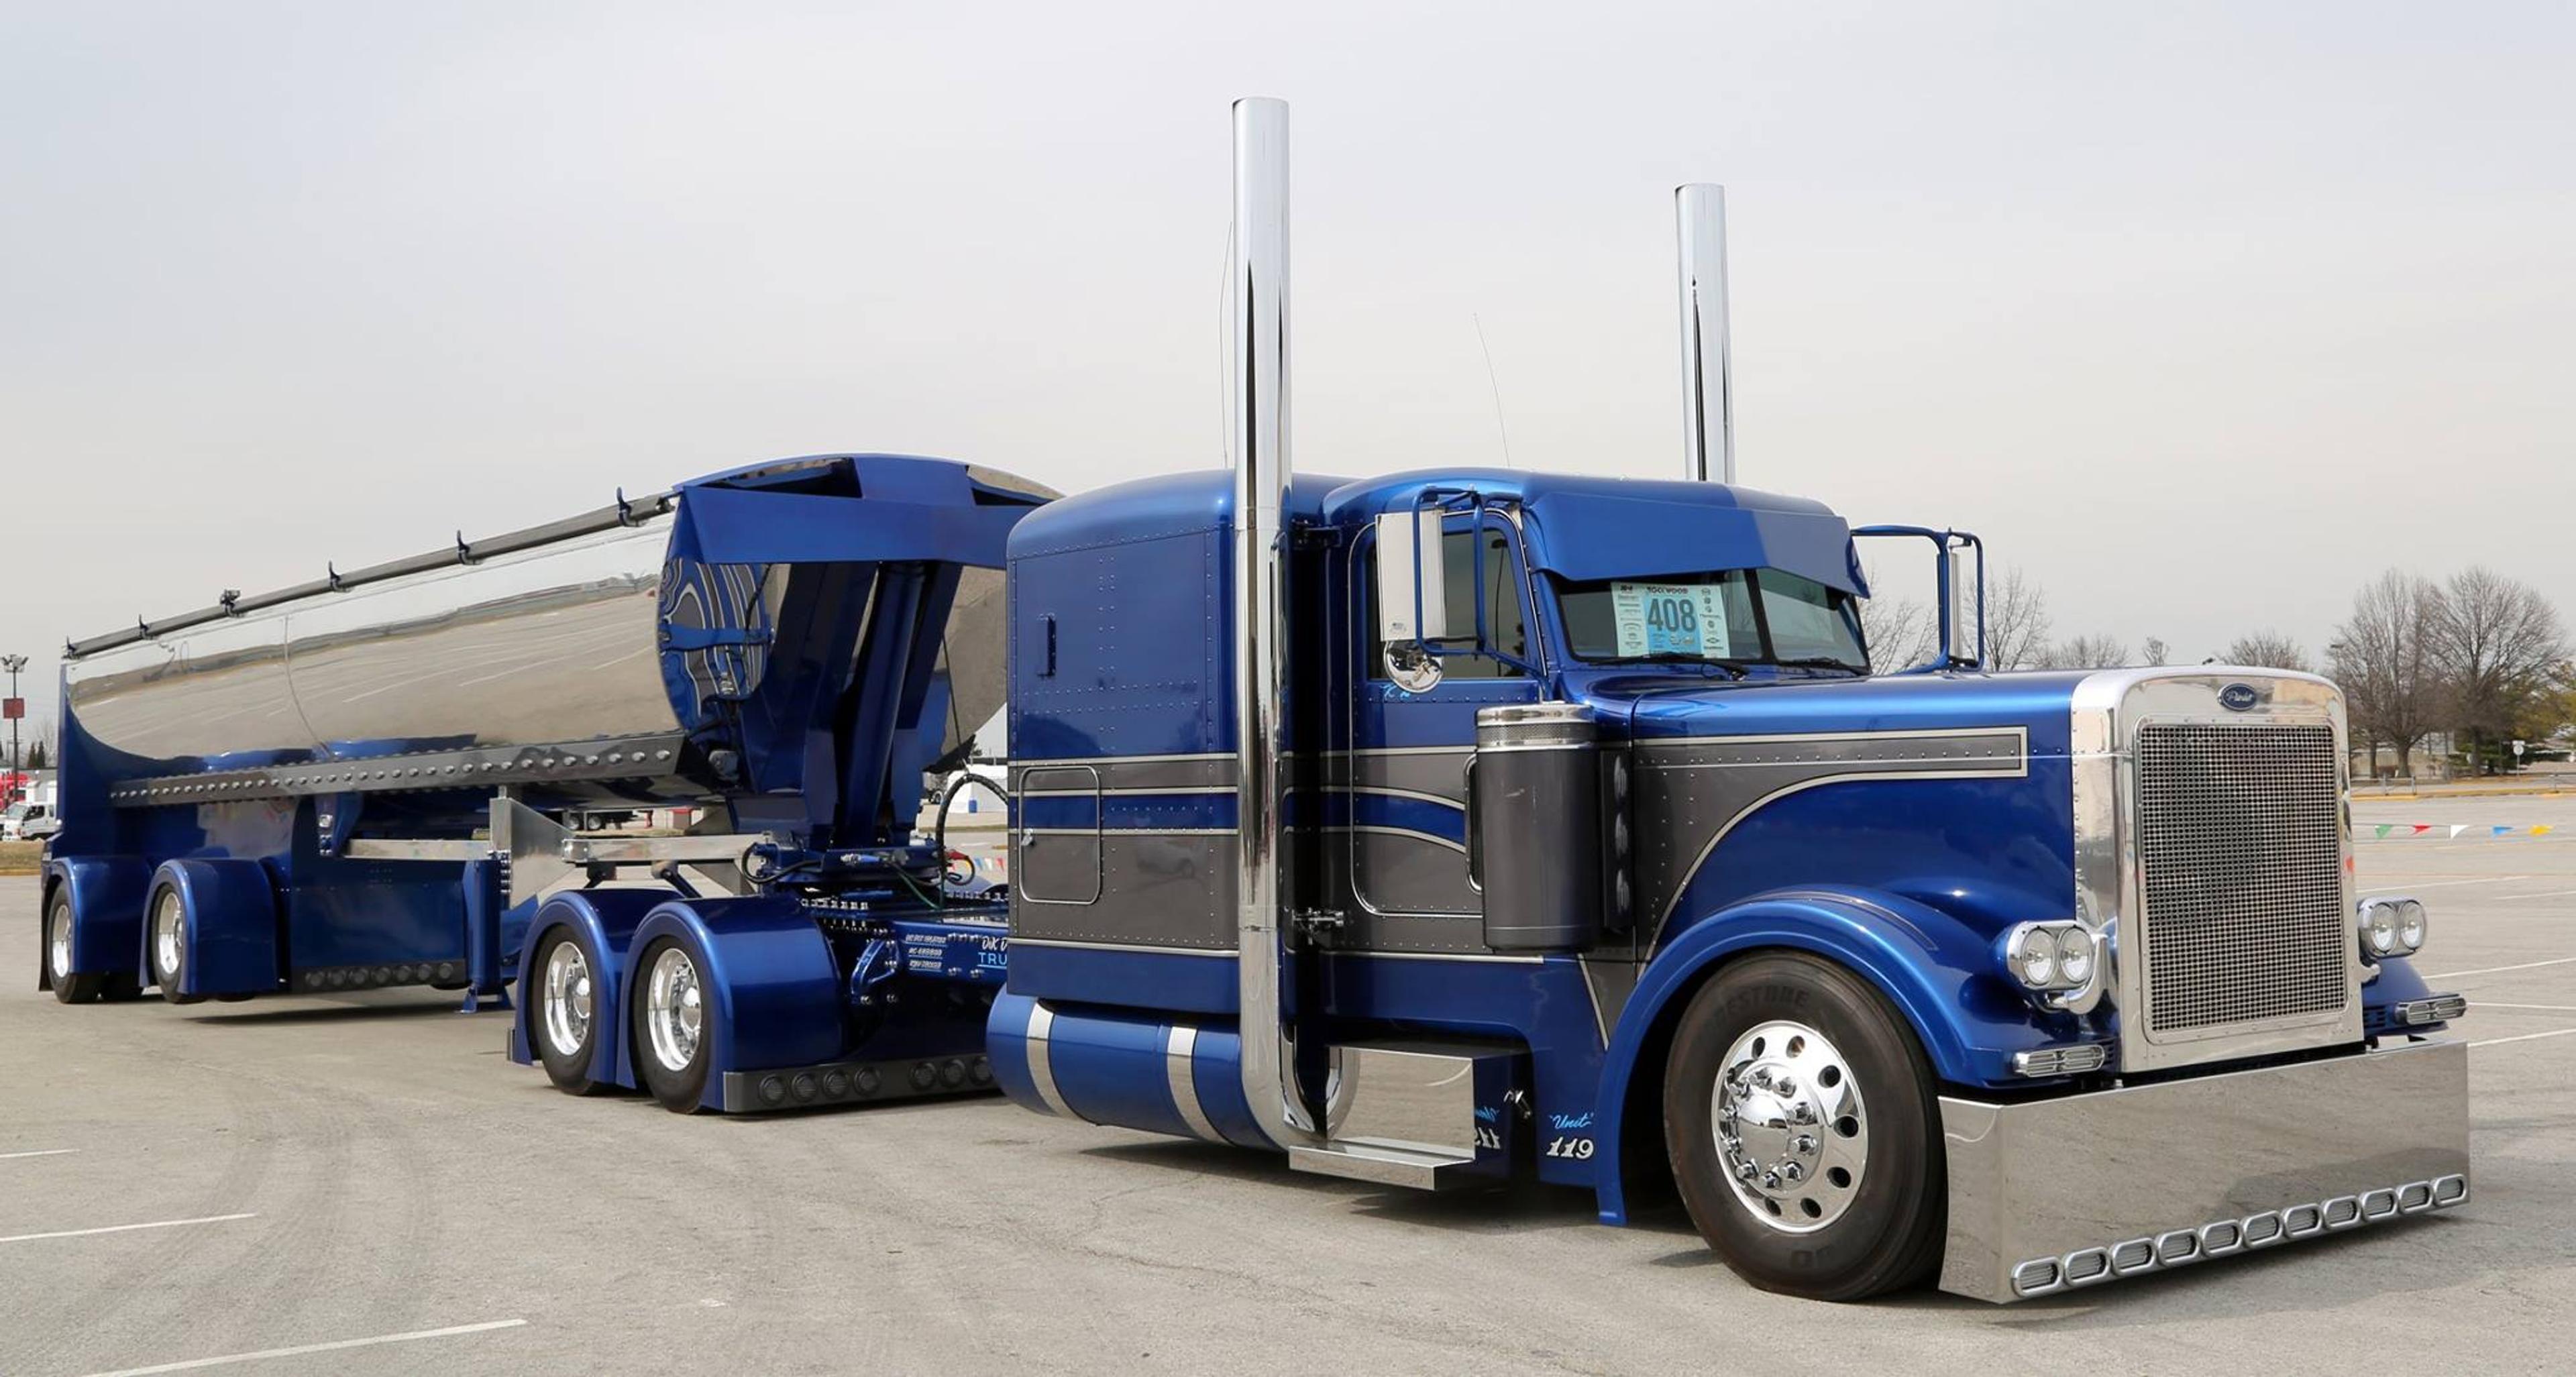 A Semi-truck with Moto Mirrors on the sides.